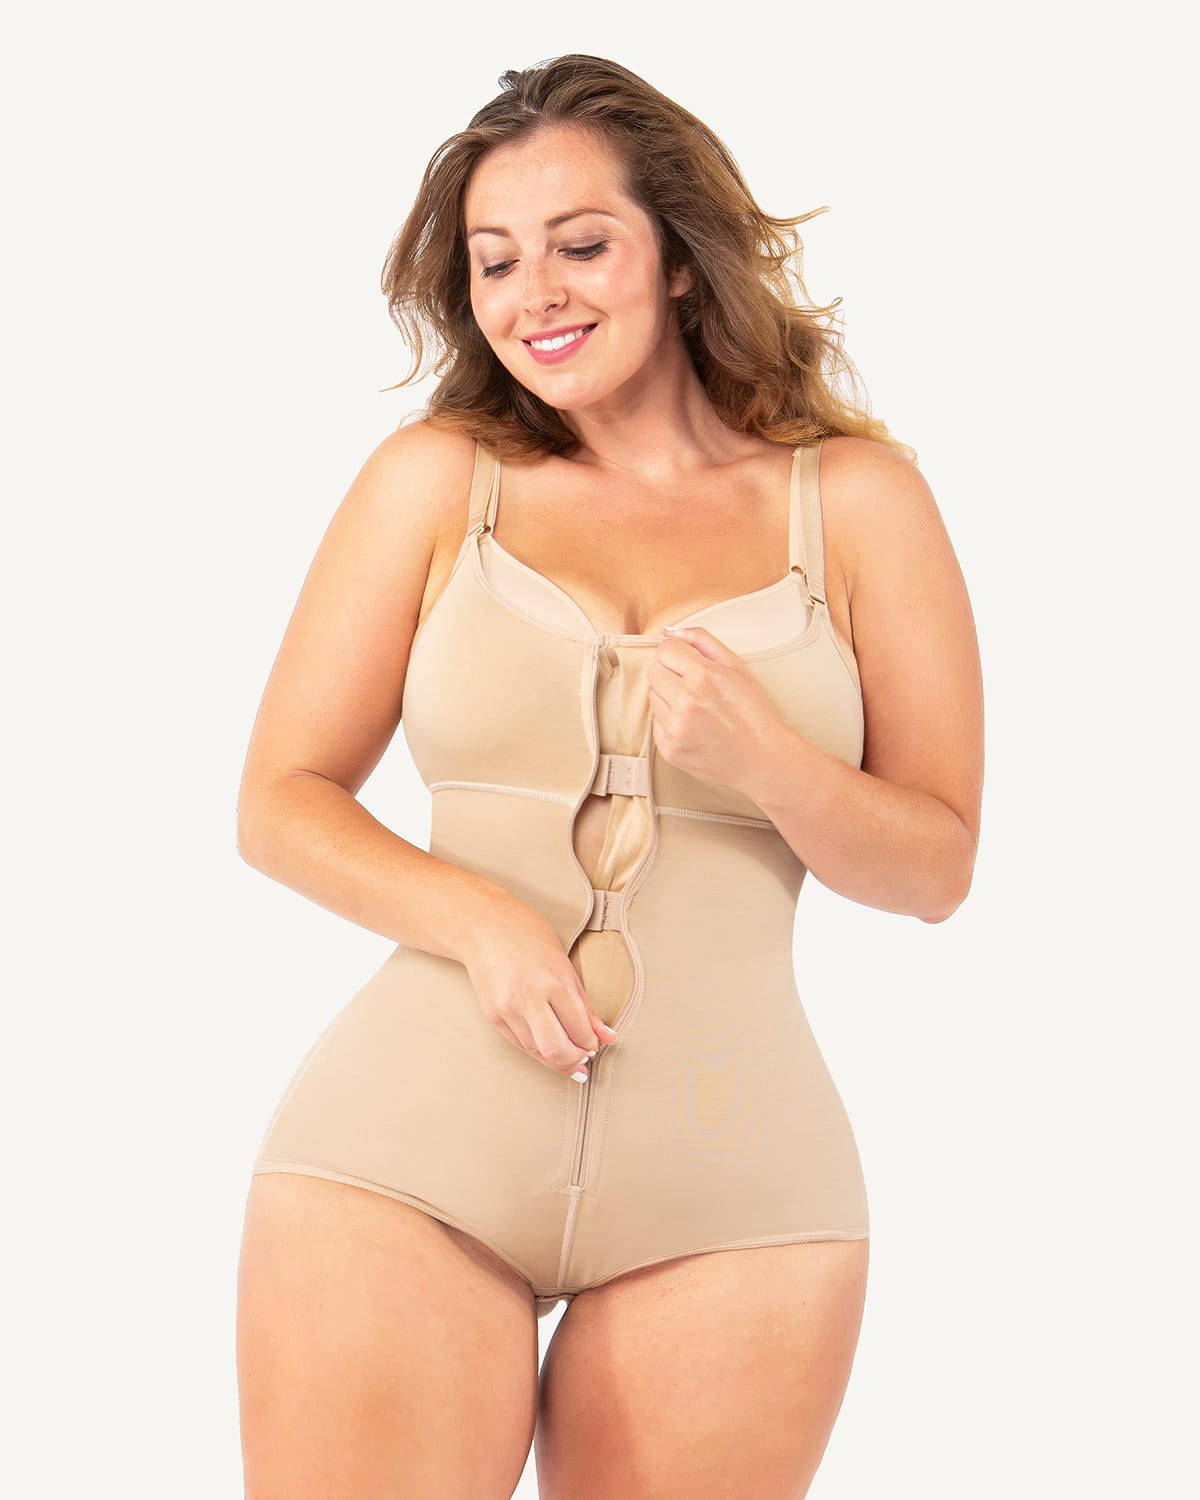 Trying On The AirSlim® Firm Tummy Compression Bodysuit Shaper With